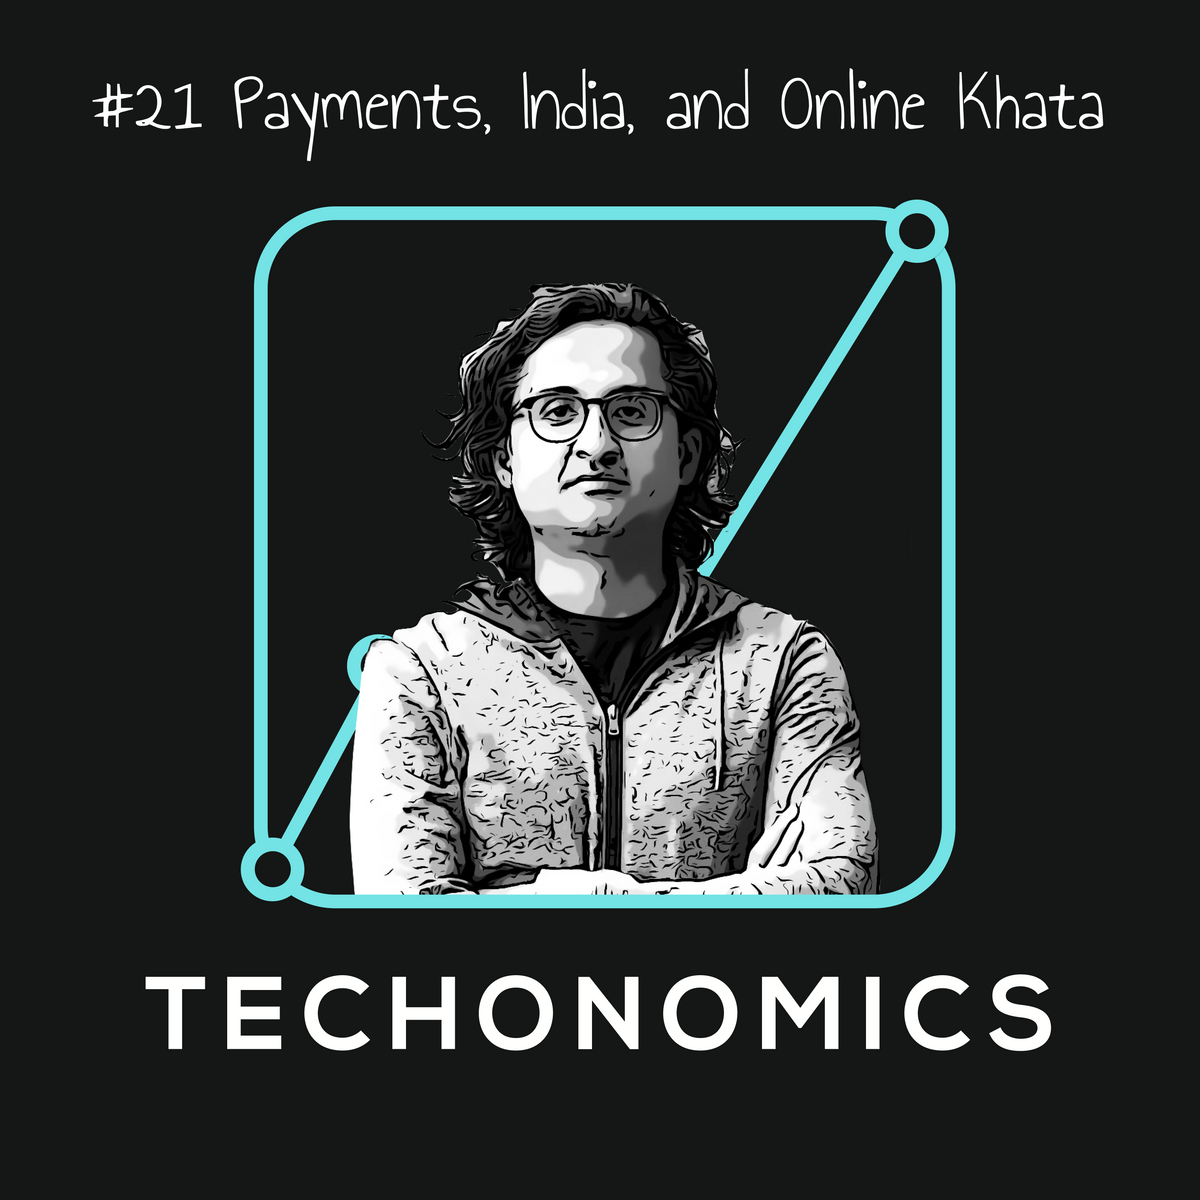 🇮🇳 #21 Payments, India, and Online Khata